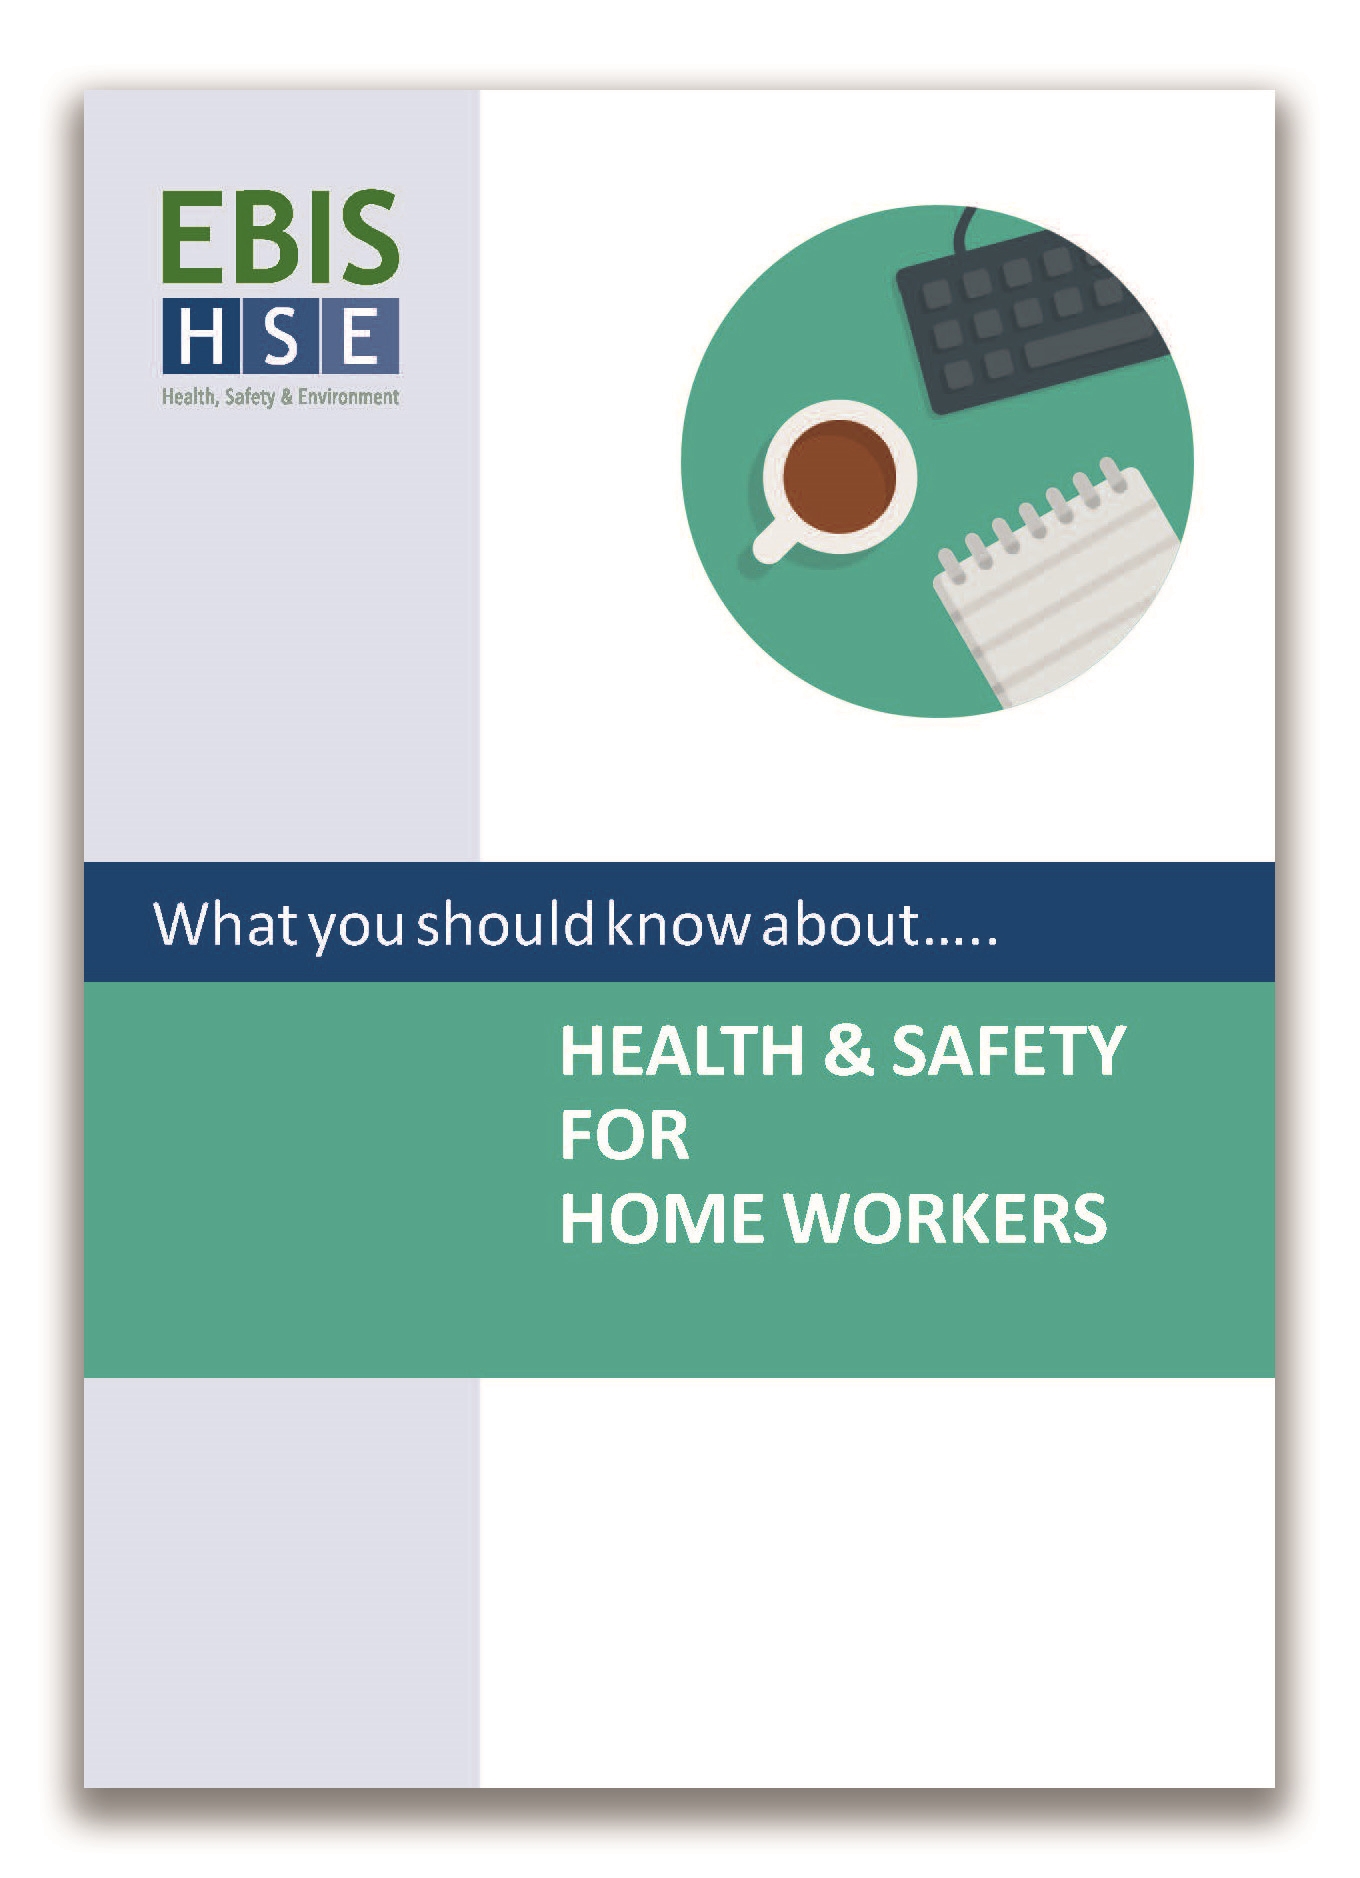 Health and safety for home workers